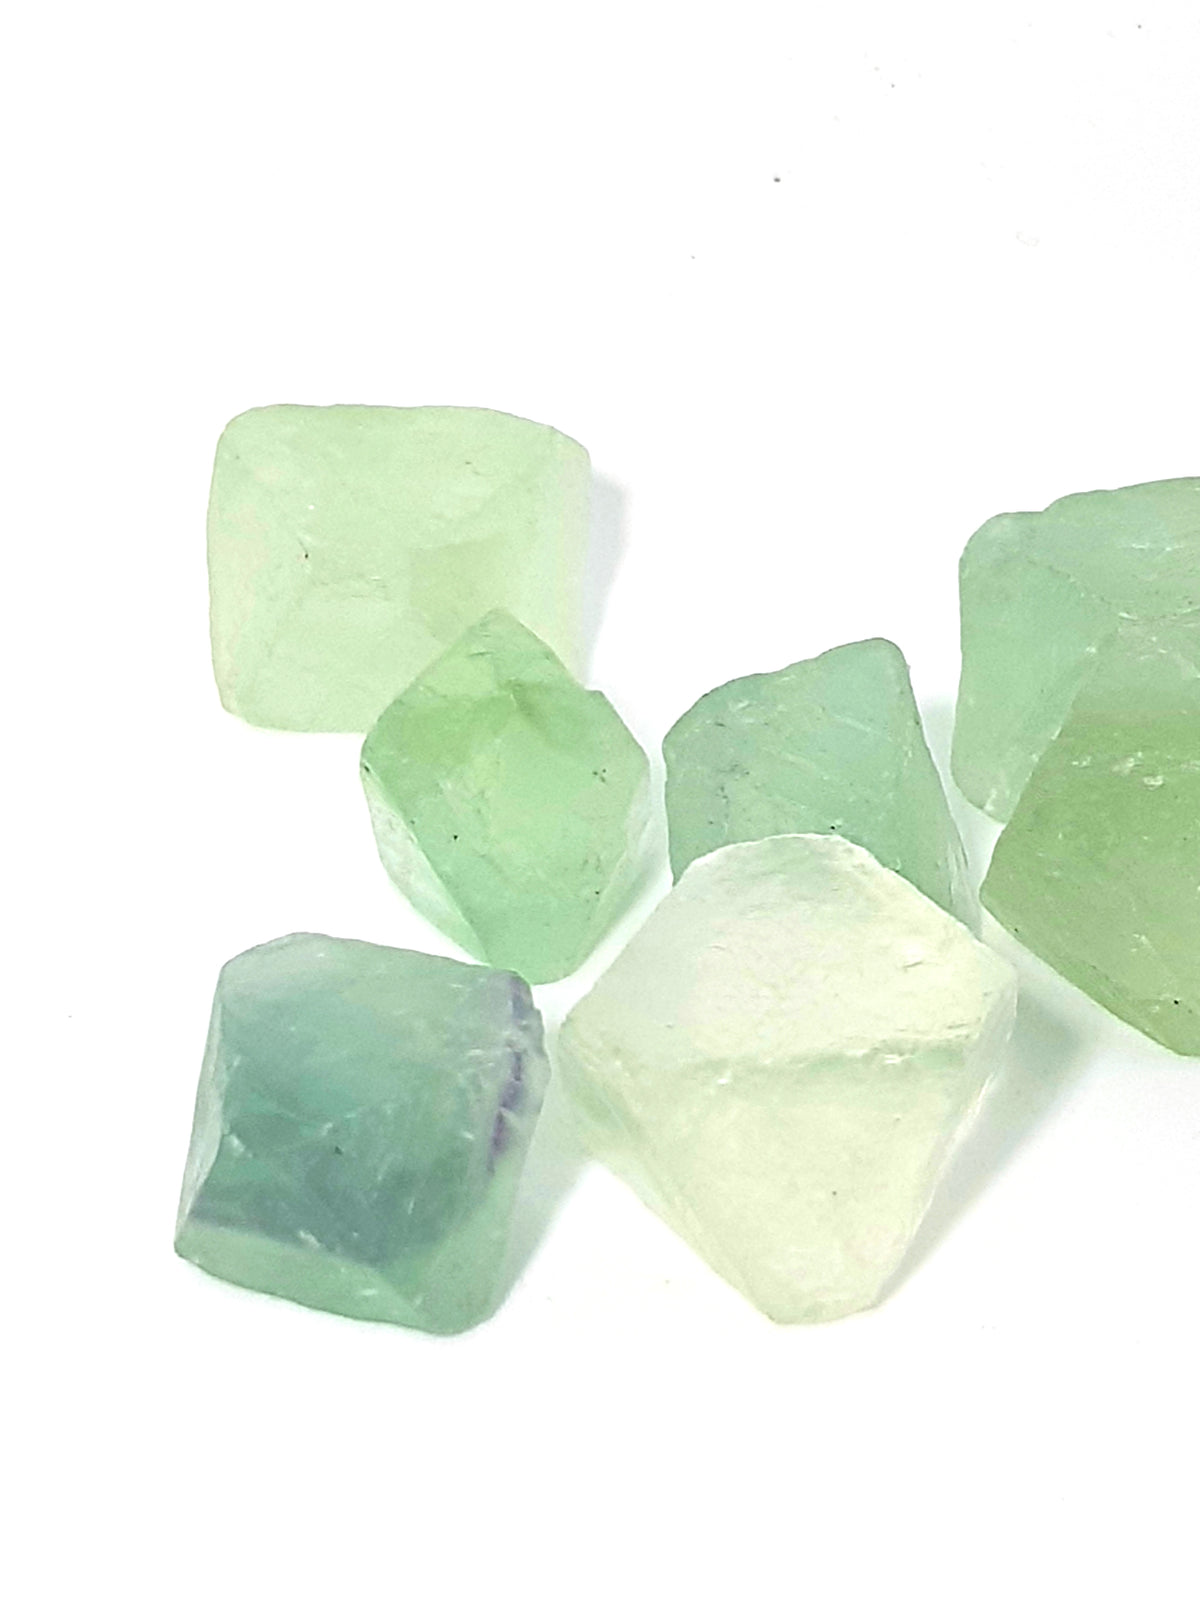 seven natural octohedral crystals of fluorite. They are translucent and range in colour from green to purple. 